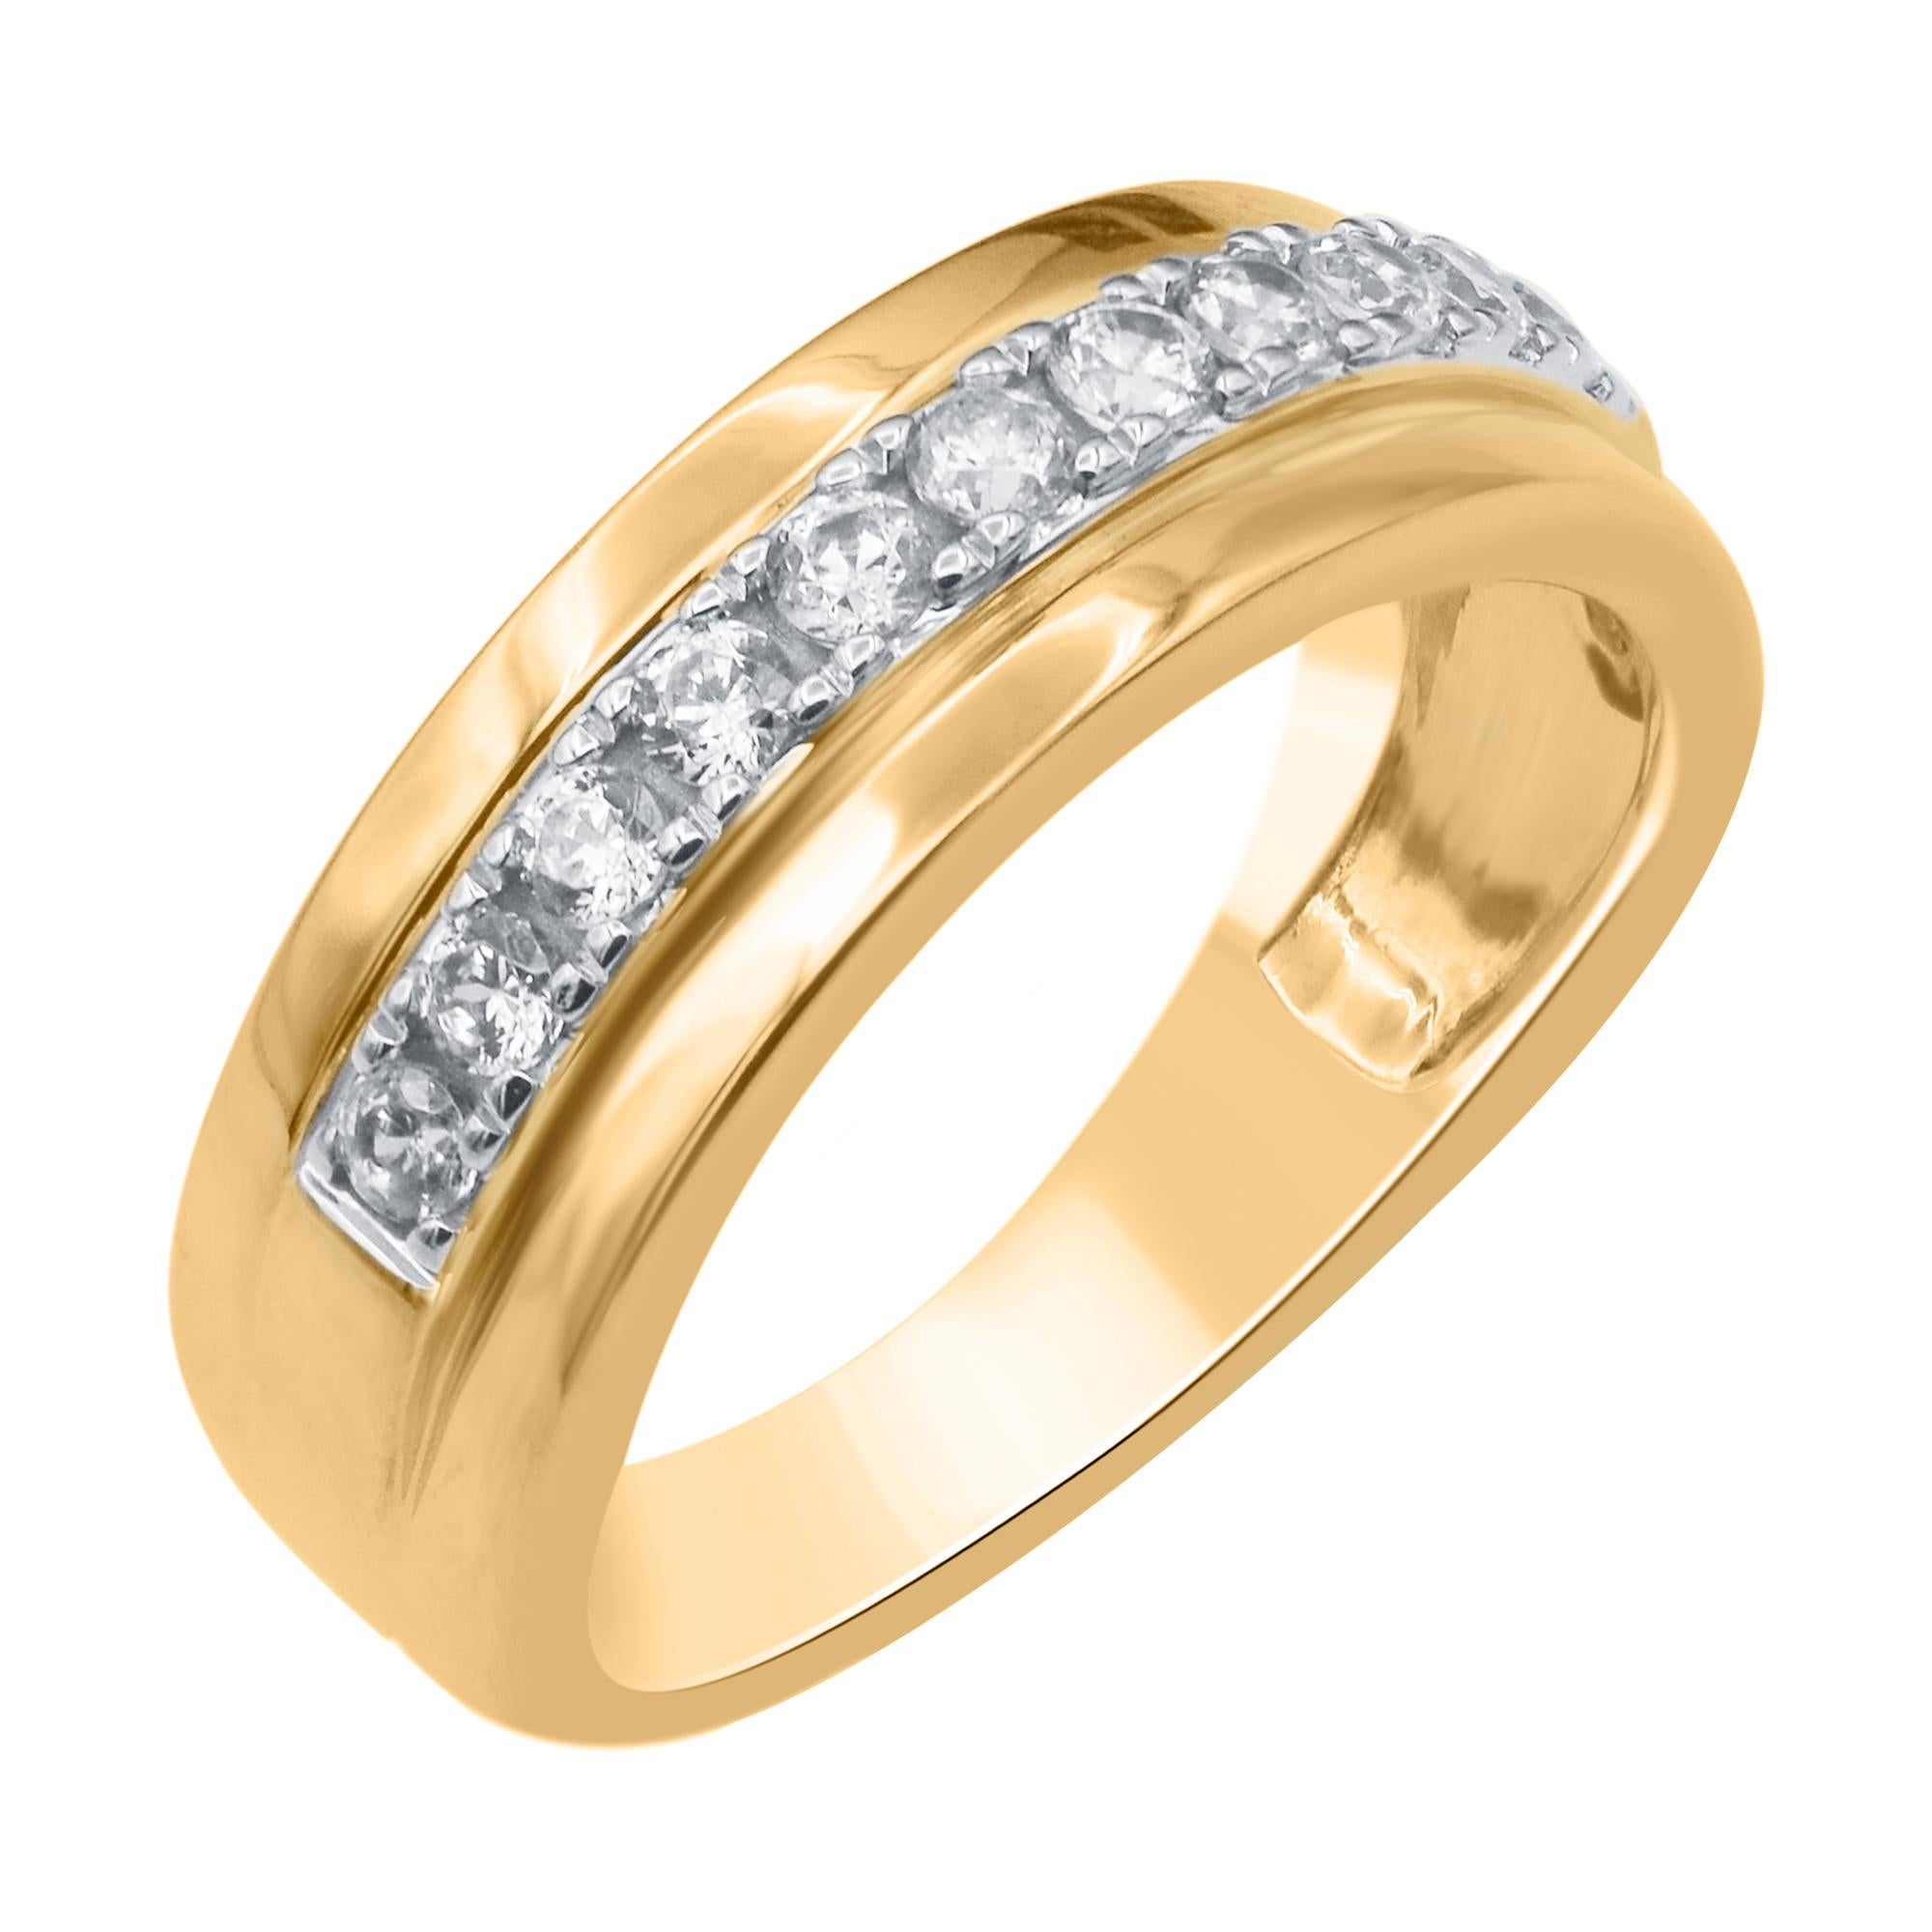 Surprise the man you love with this splendid diamond band in 14KT yellow gold. Eleven bold 0.50 carat brilliant cut diamond glisten across the center. The white diamonds are graded as H-I color and I-2 clarity.